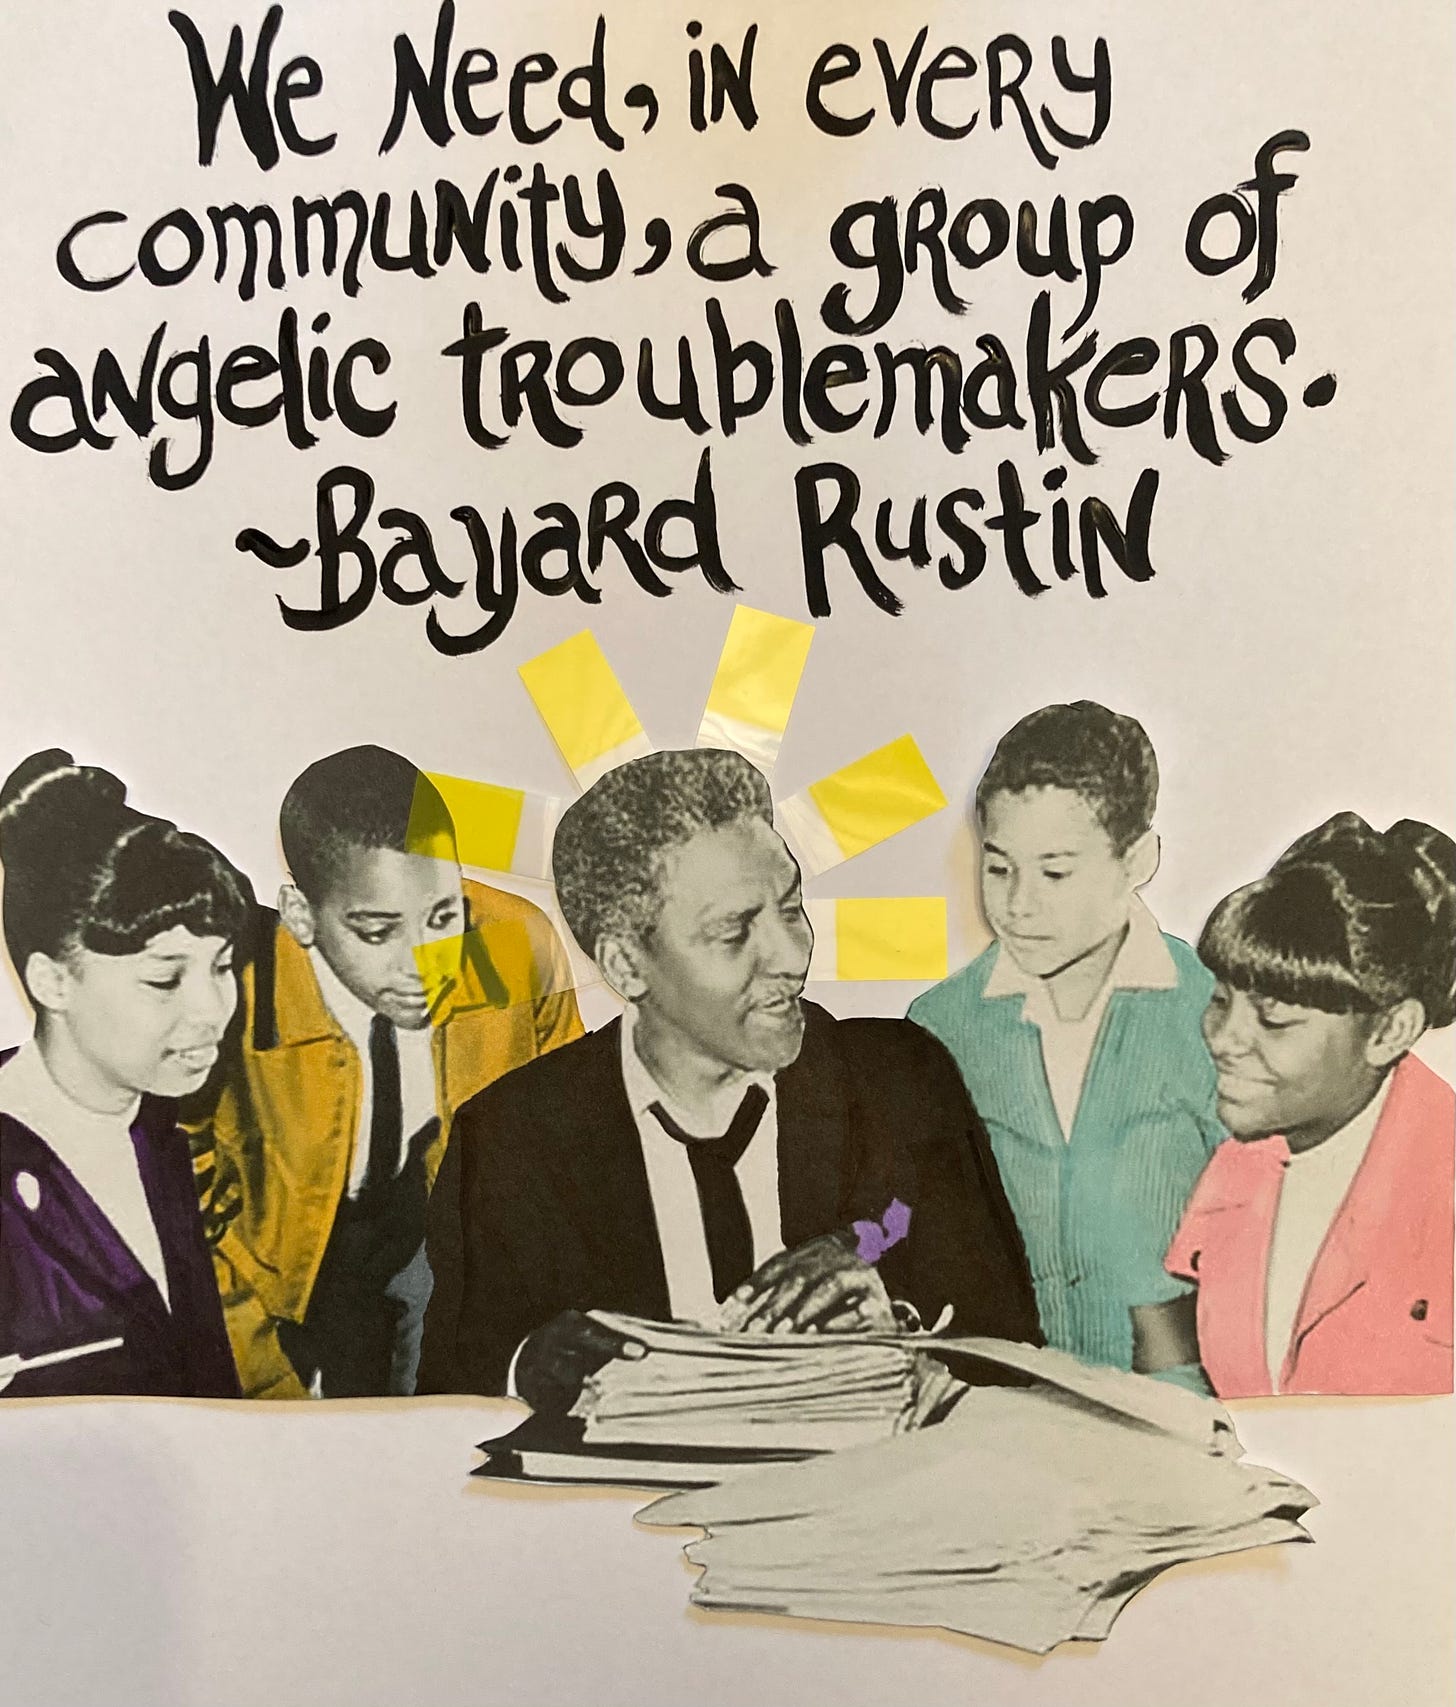 art work by JJ of photo of Bayard Rustin with iconic halo - with quote, "We need, in every community, a group of angelic troublemakers." 